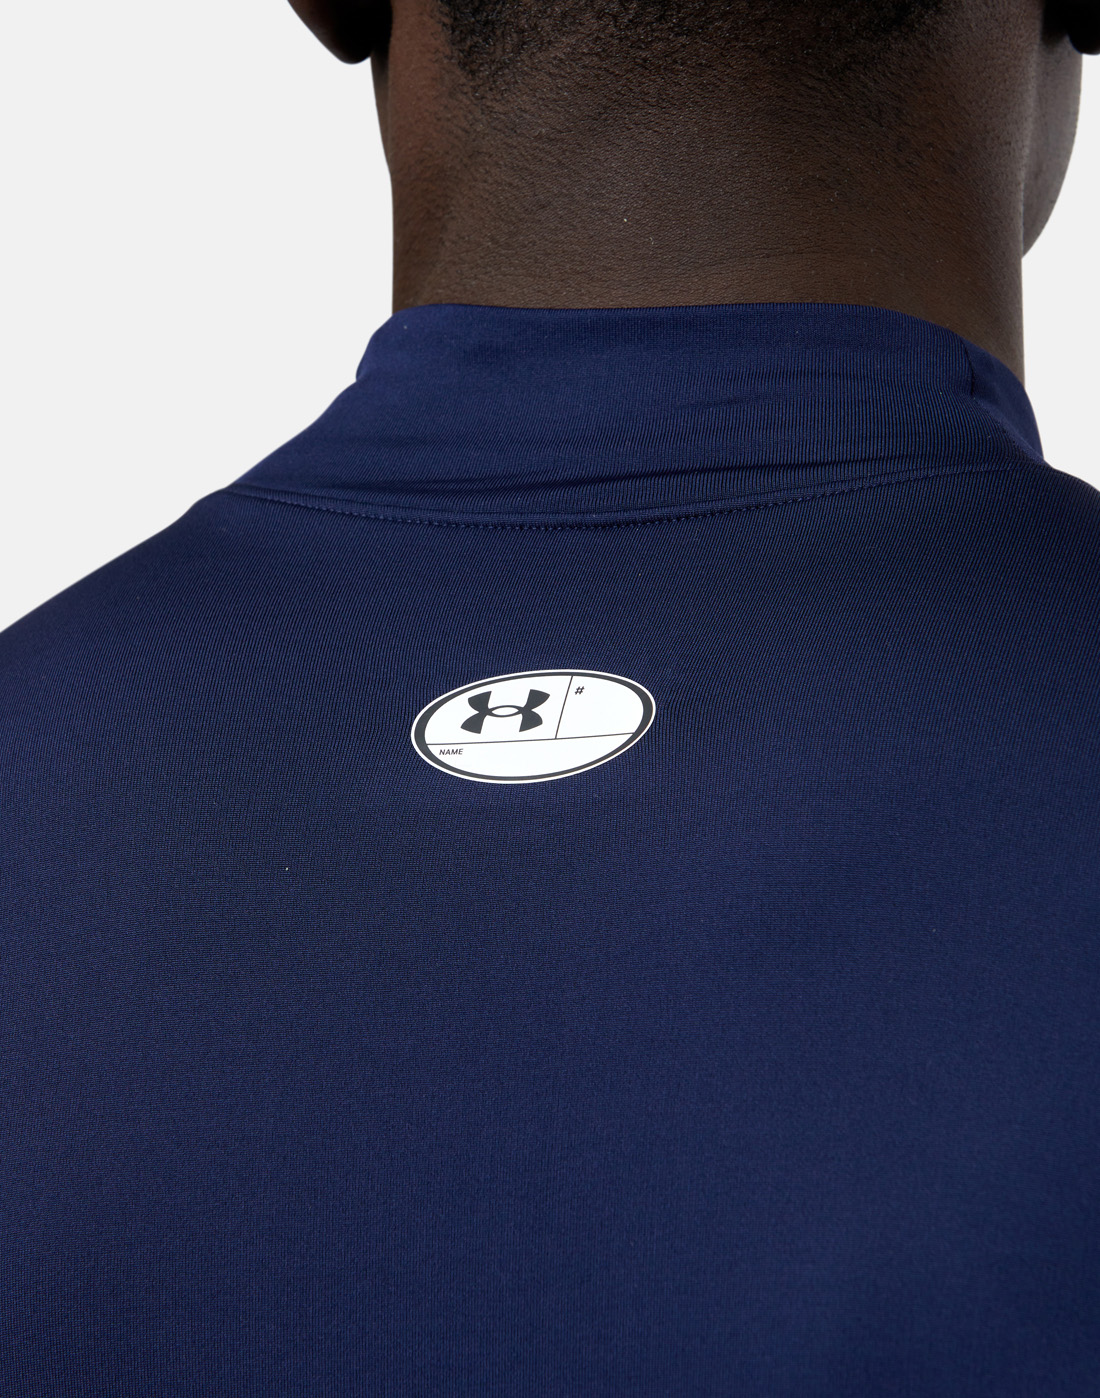 Under Armour Mens ColdGear Armour Fitted Mock Top - Navy | Life Style ...